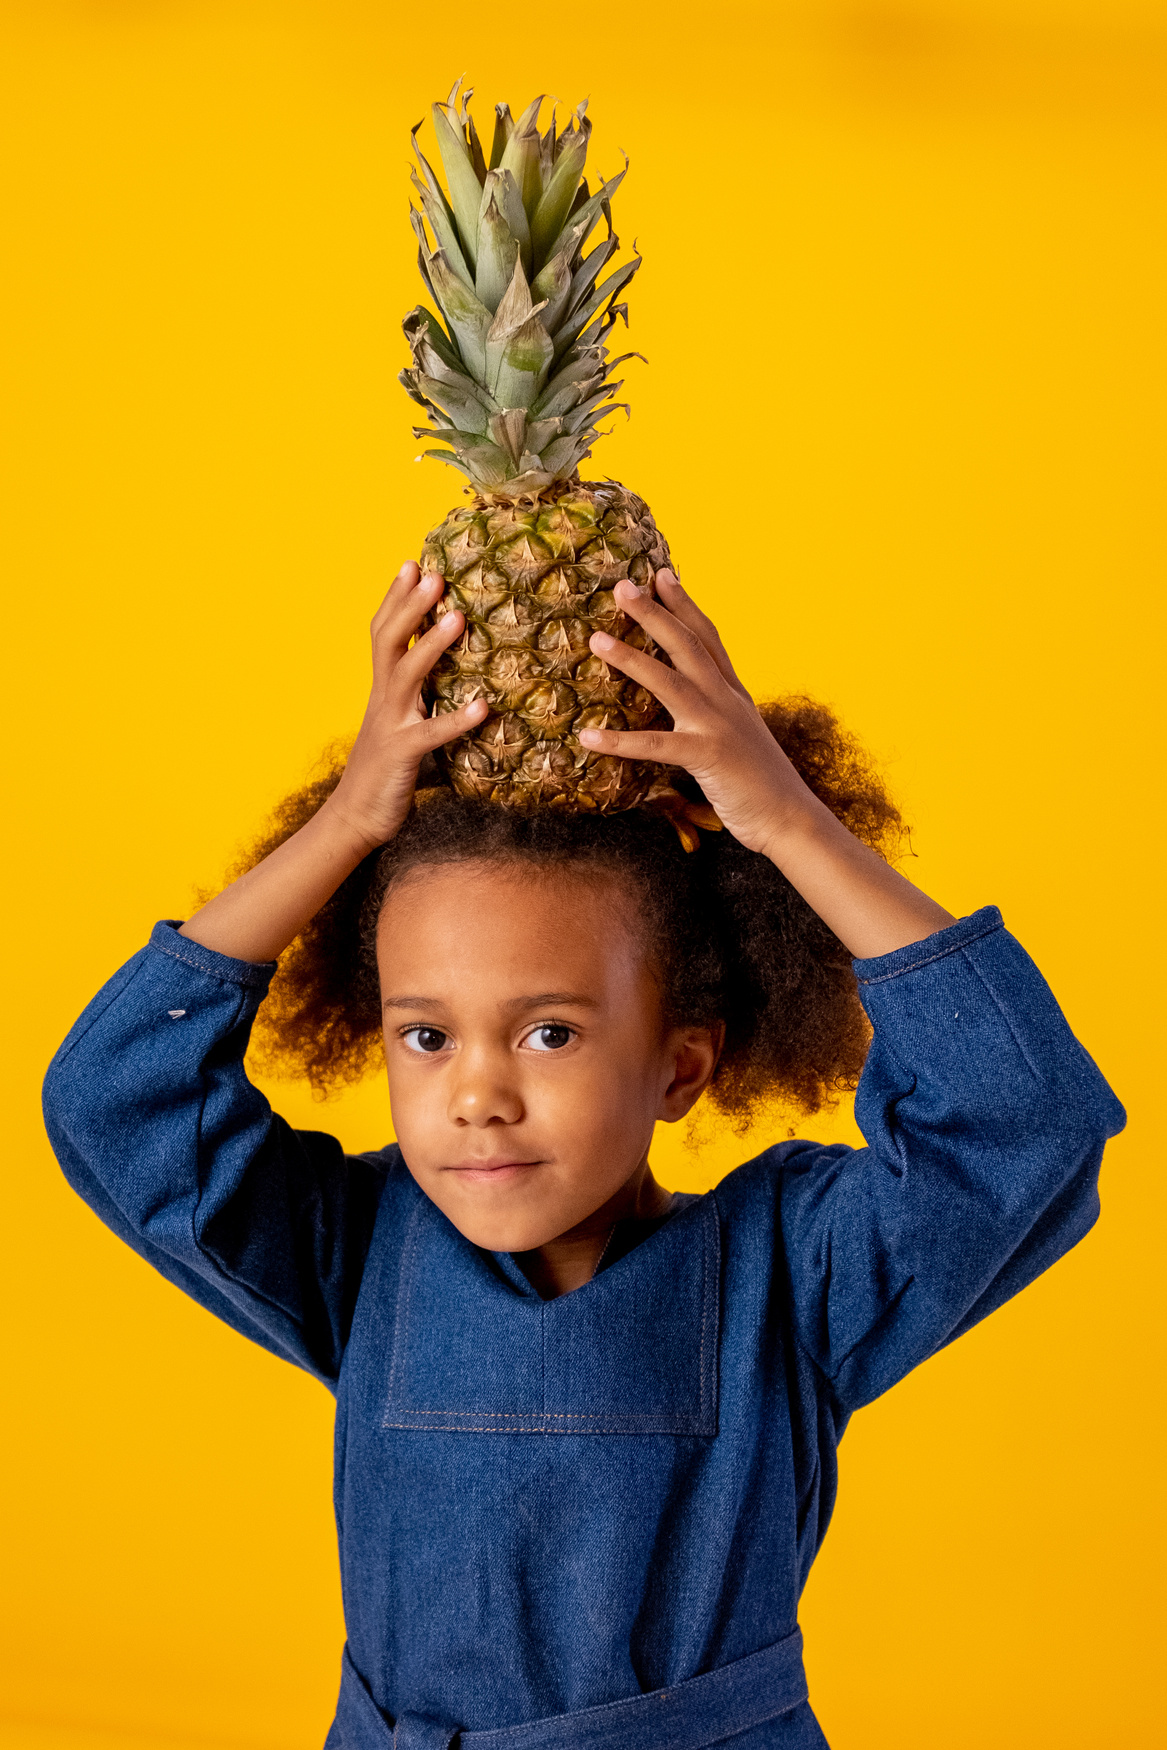 Boy in Blue Collared Shirt Holding Pineapple